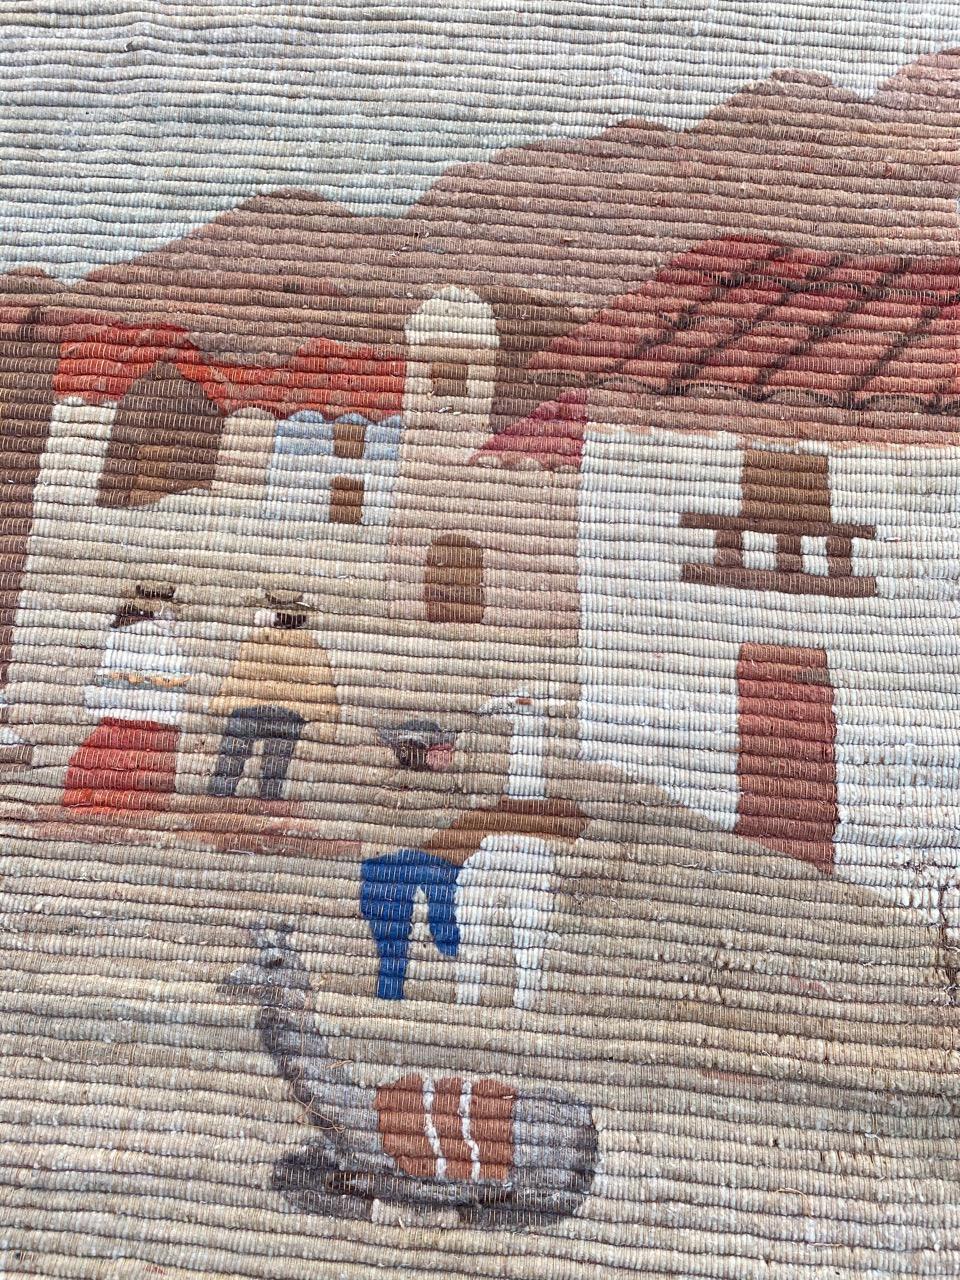 Little tapestry with a native design of the town and beautiful colors, entirely hand worked with wool on cotton and wool foundation.